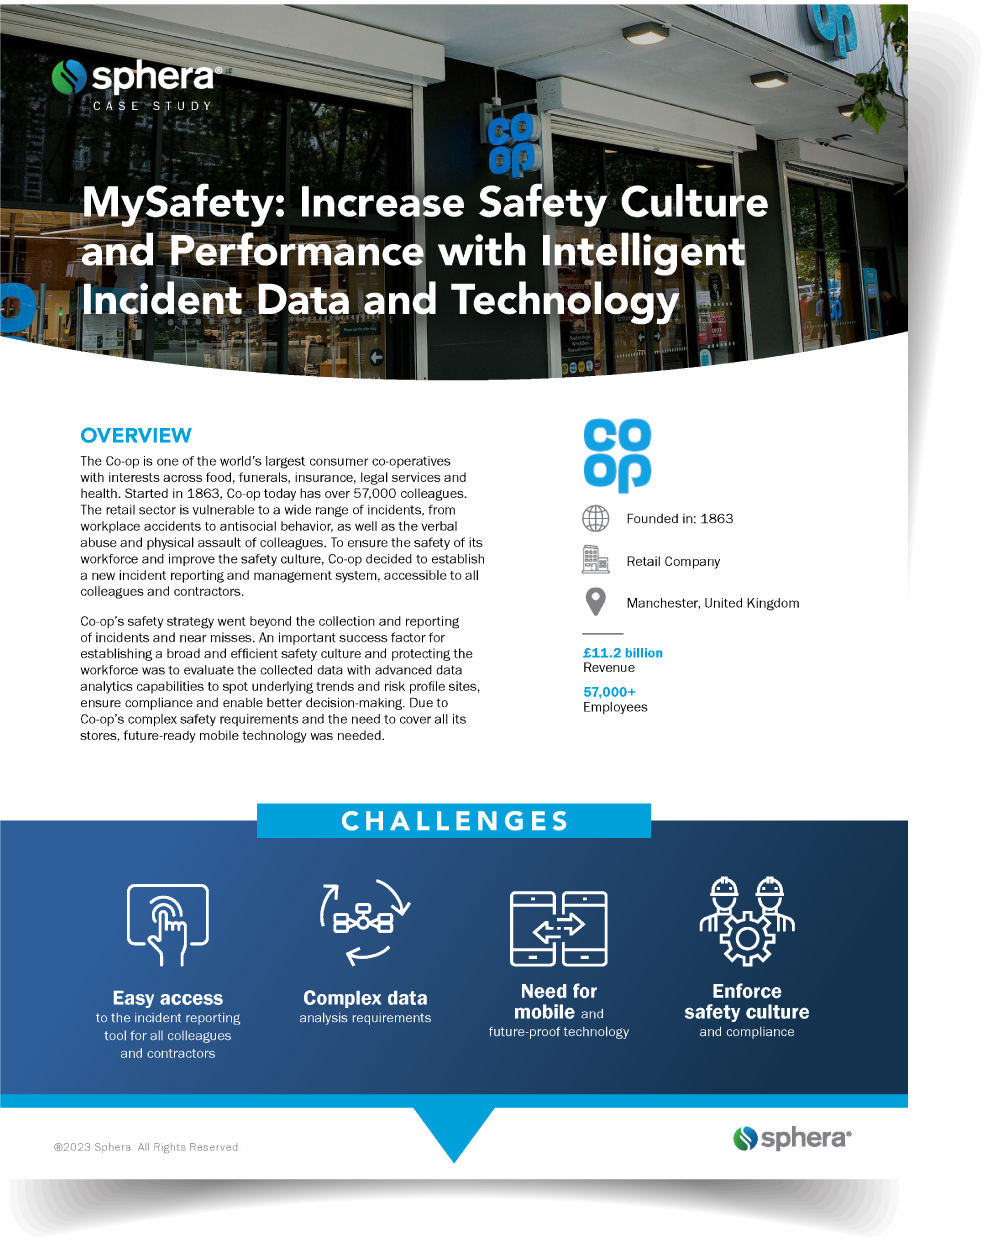 Increase Safety Culture & Performance with Intelligent Data